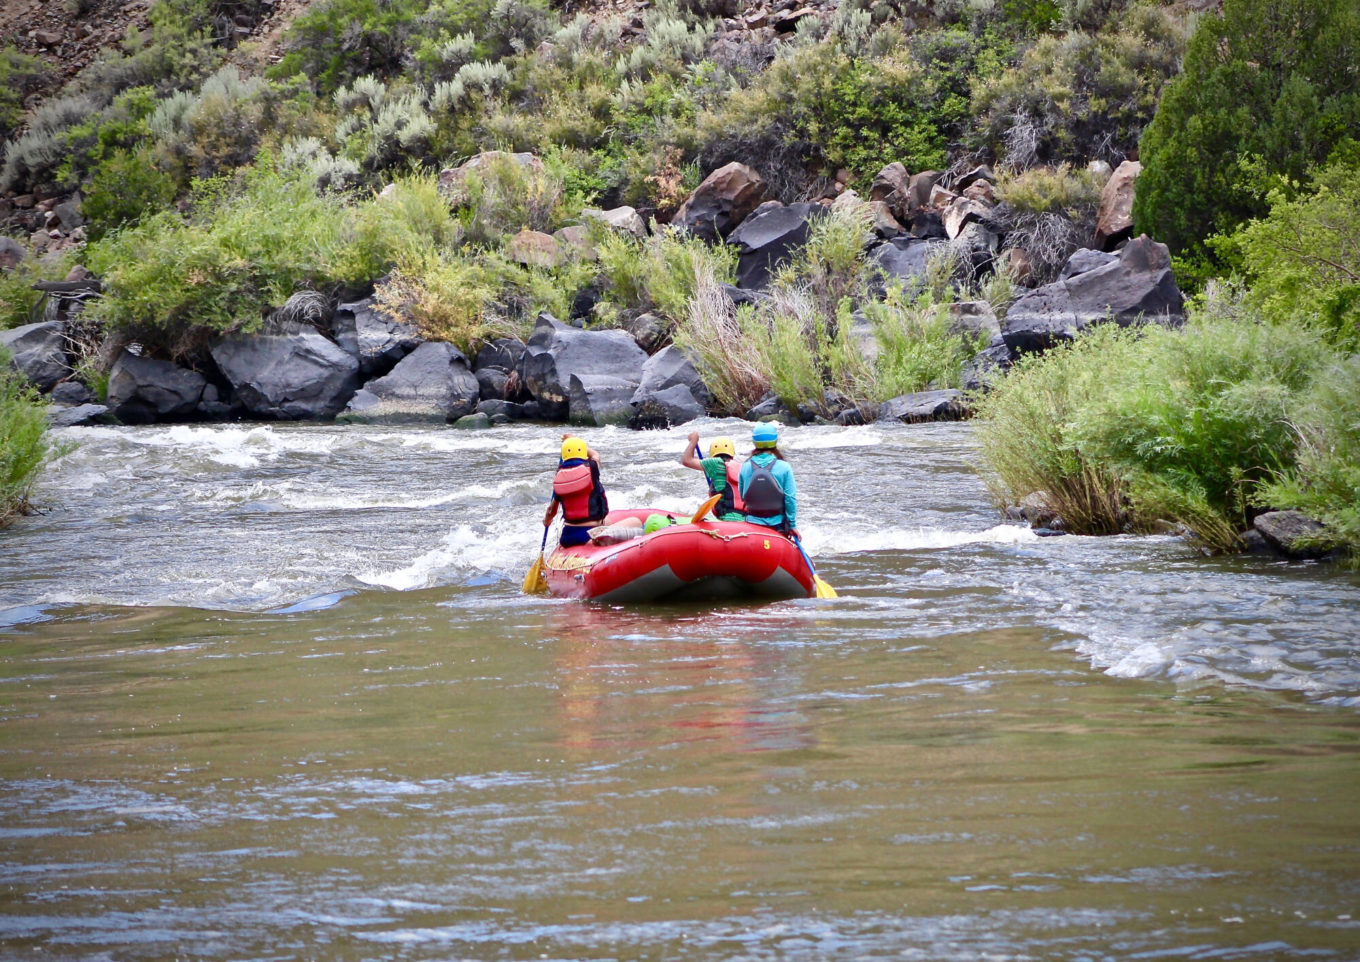 Rafters going down the racecourse on rio grande and Rio Chama